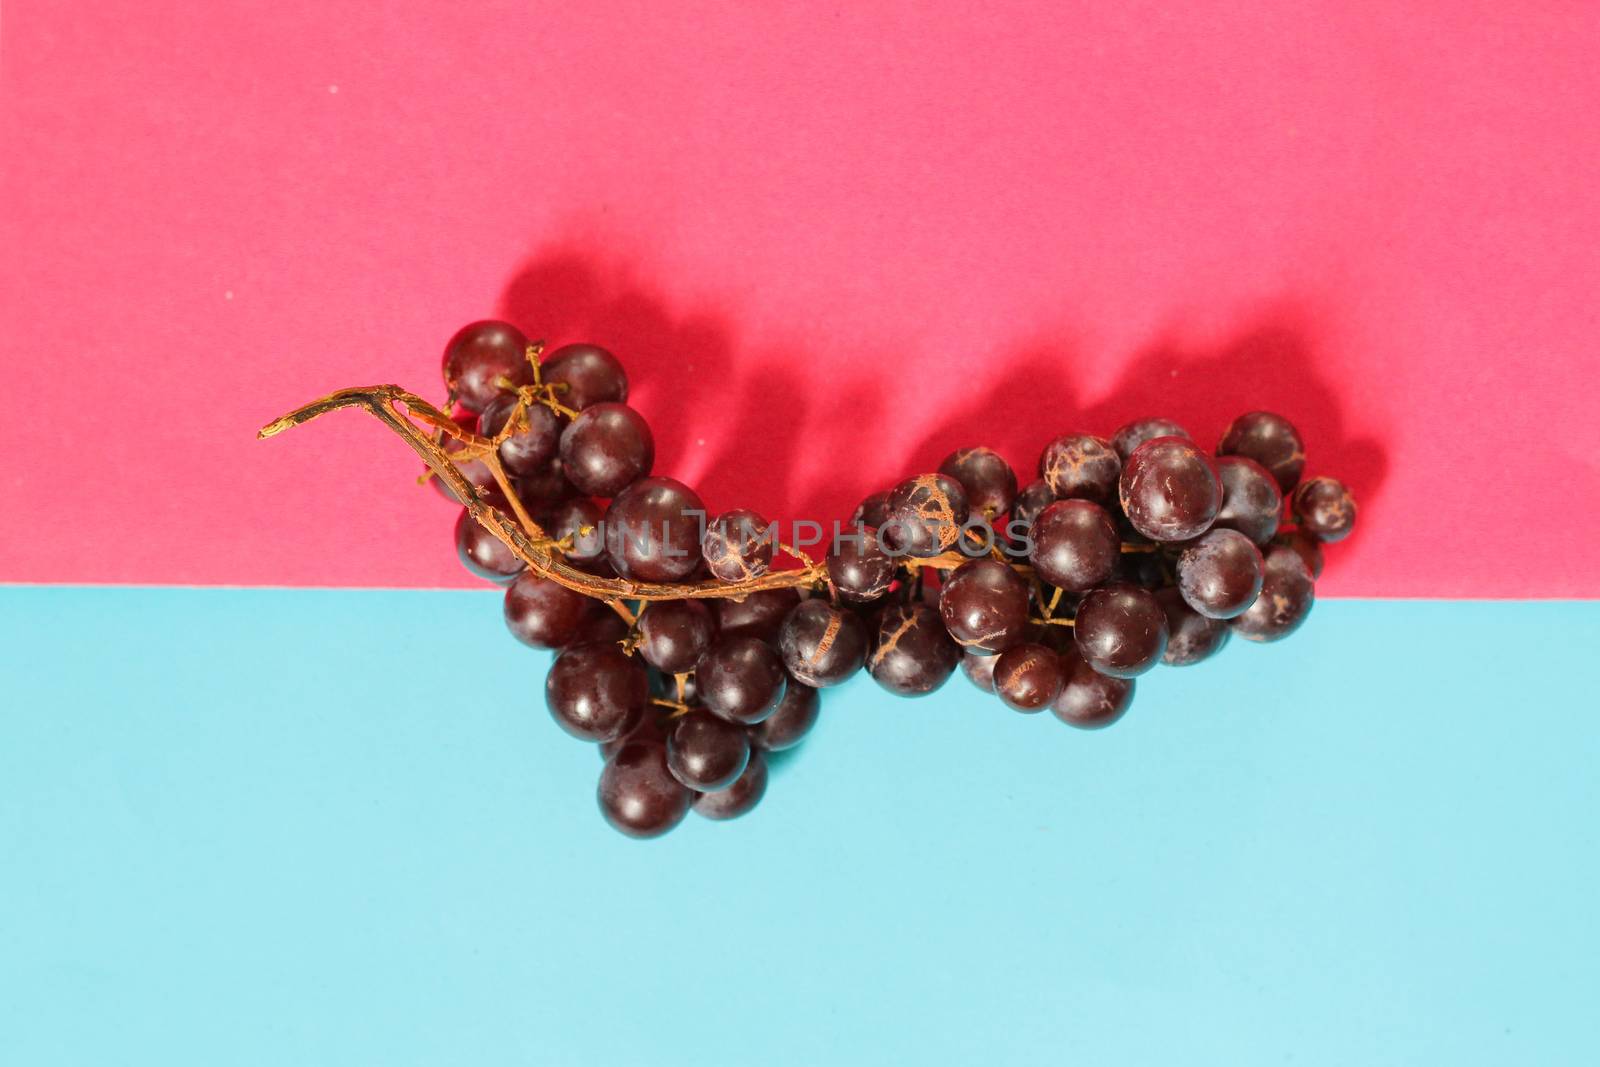 Red grapes against vibrantly colored pink and blue background to depic summer